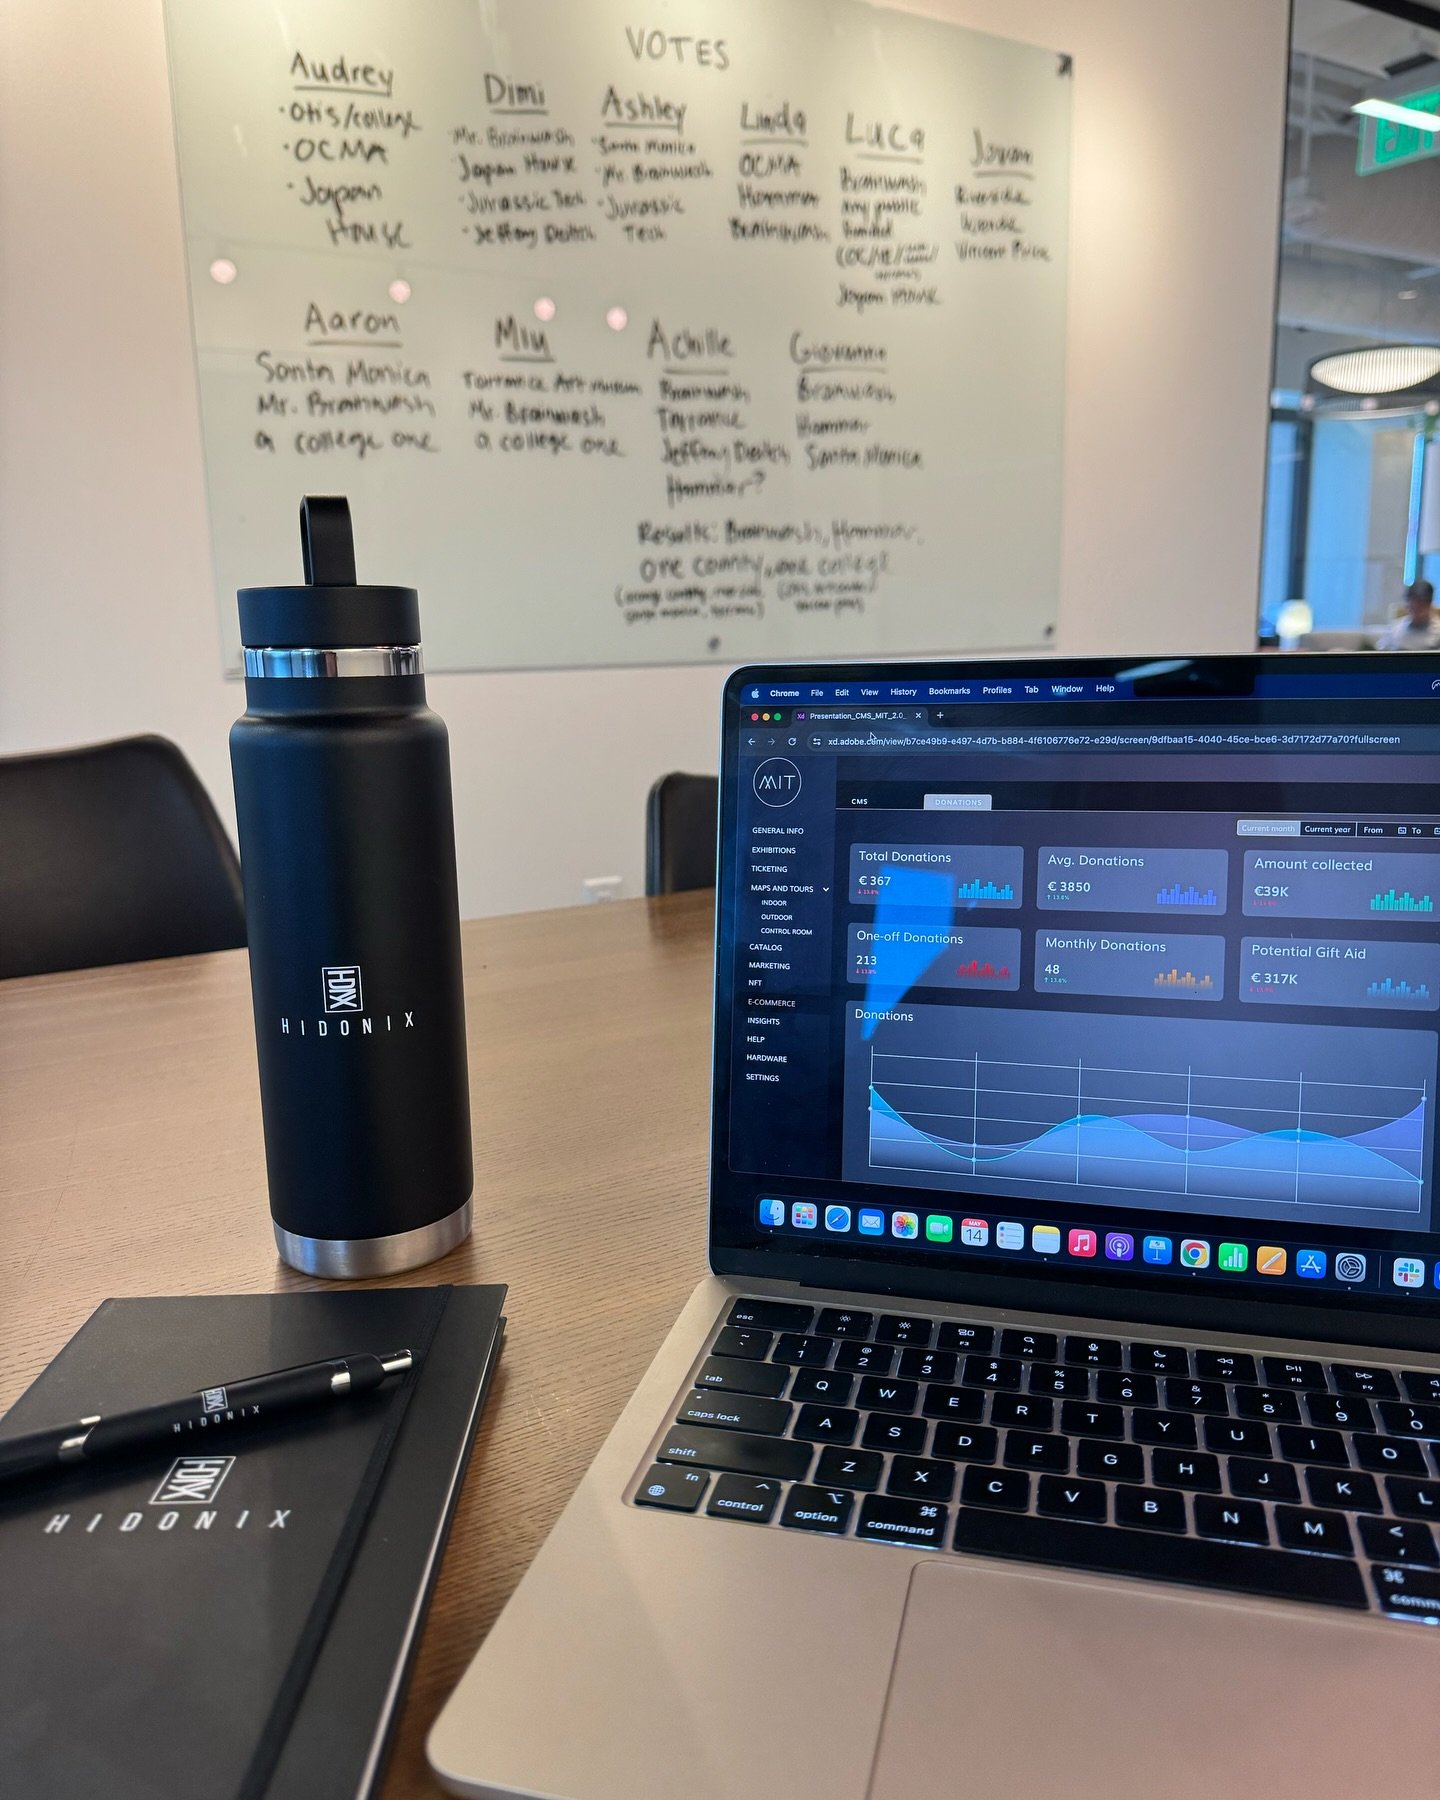 Collaborative synergy in action today at Hidonix HQ in Los Angeles! Can you guess what we are working on?
-
#hidonix #meeting #collaboration #team